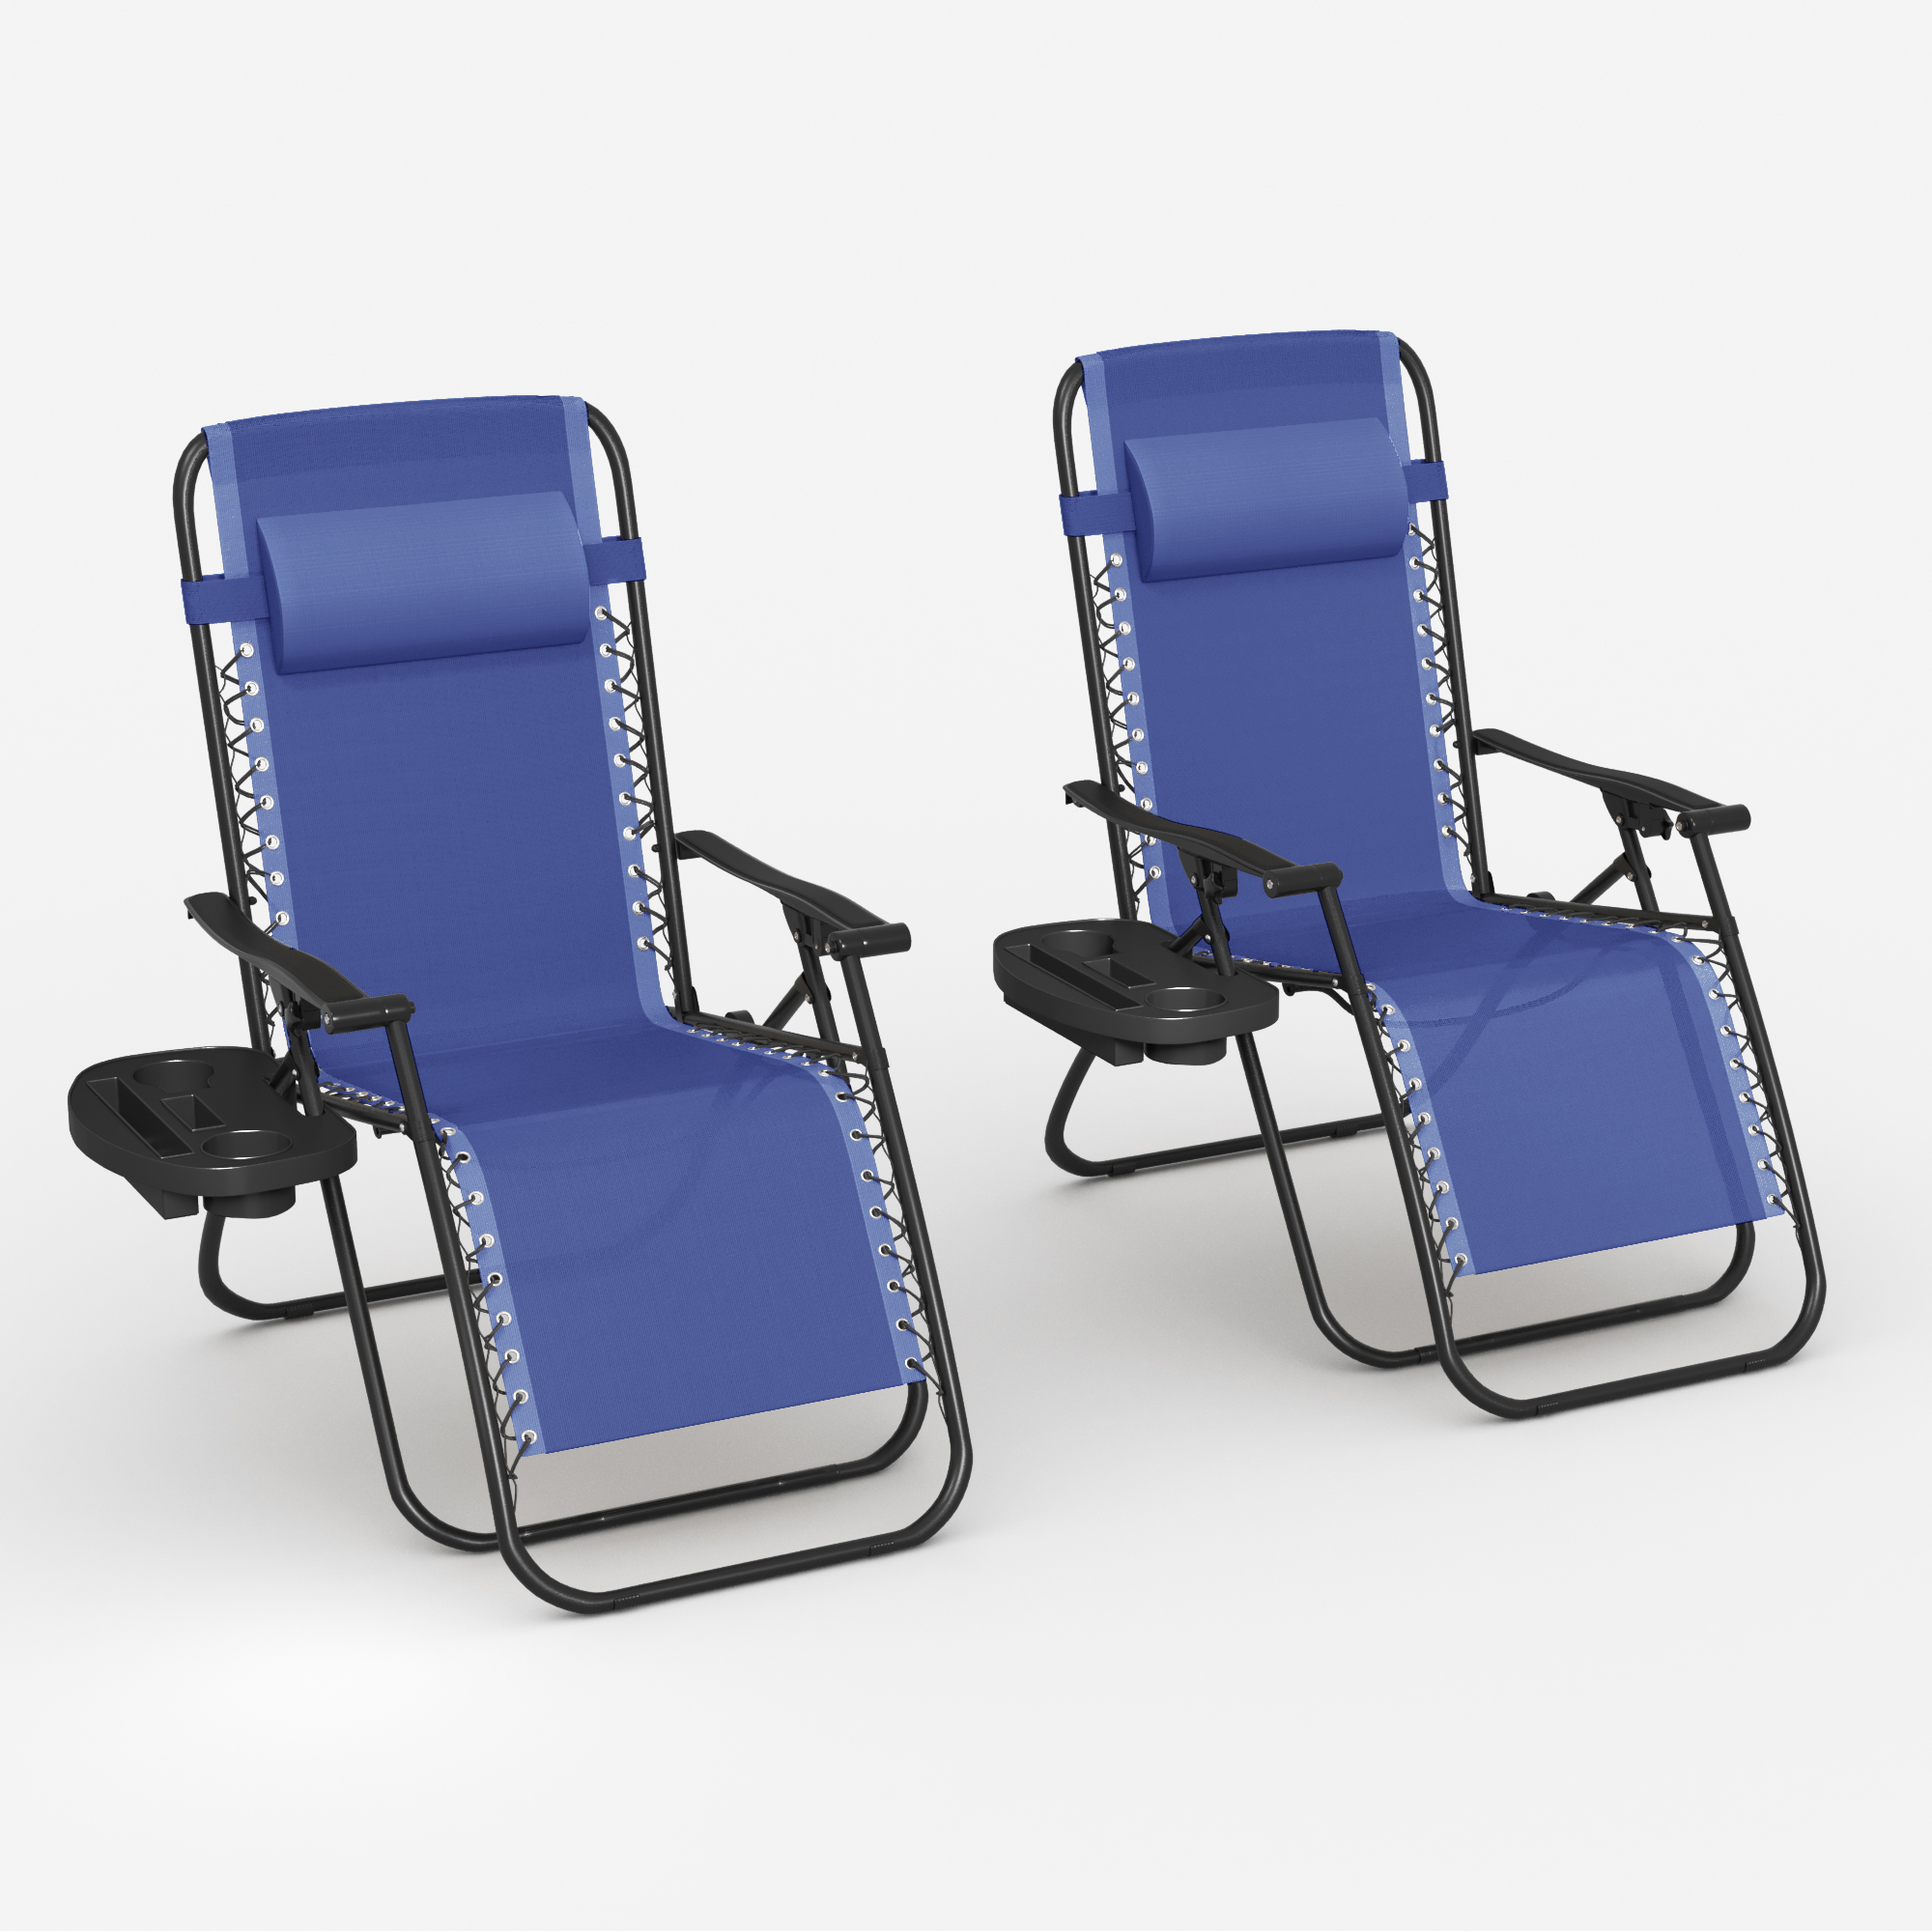 Lacoo 2 Pack Utility Tray Steel Zero-Gravity Chair - Blue - image 5 of 7